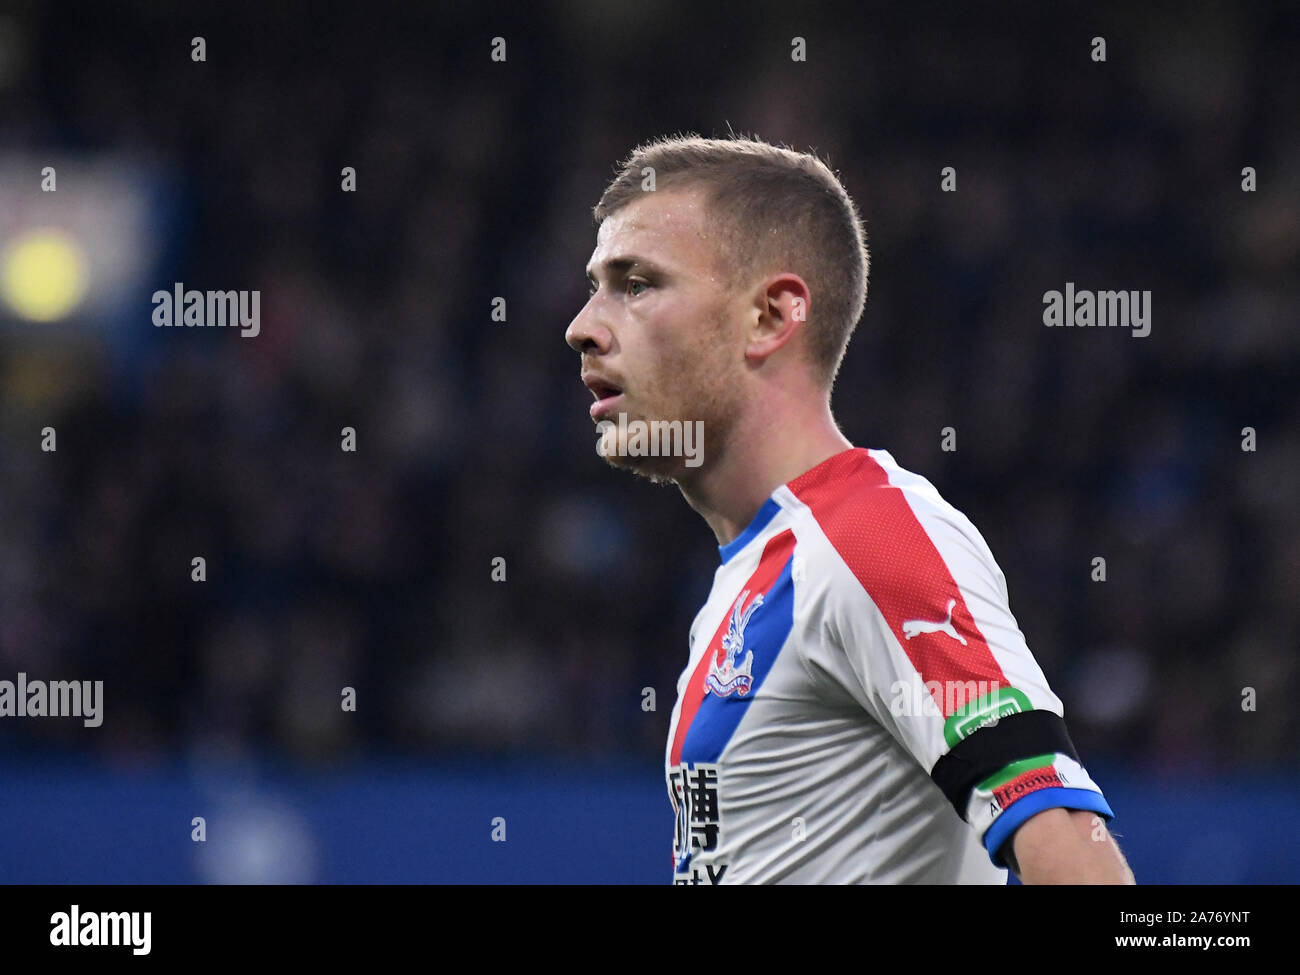 LONDON, ENGLAND - NOVEMBER 4, 2018: Max Meyer of Palace pictured during the 2018/19 Premier League game between Chelsea FC and Crystal Palace FC at Stamford Bridge. Stock Photo